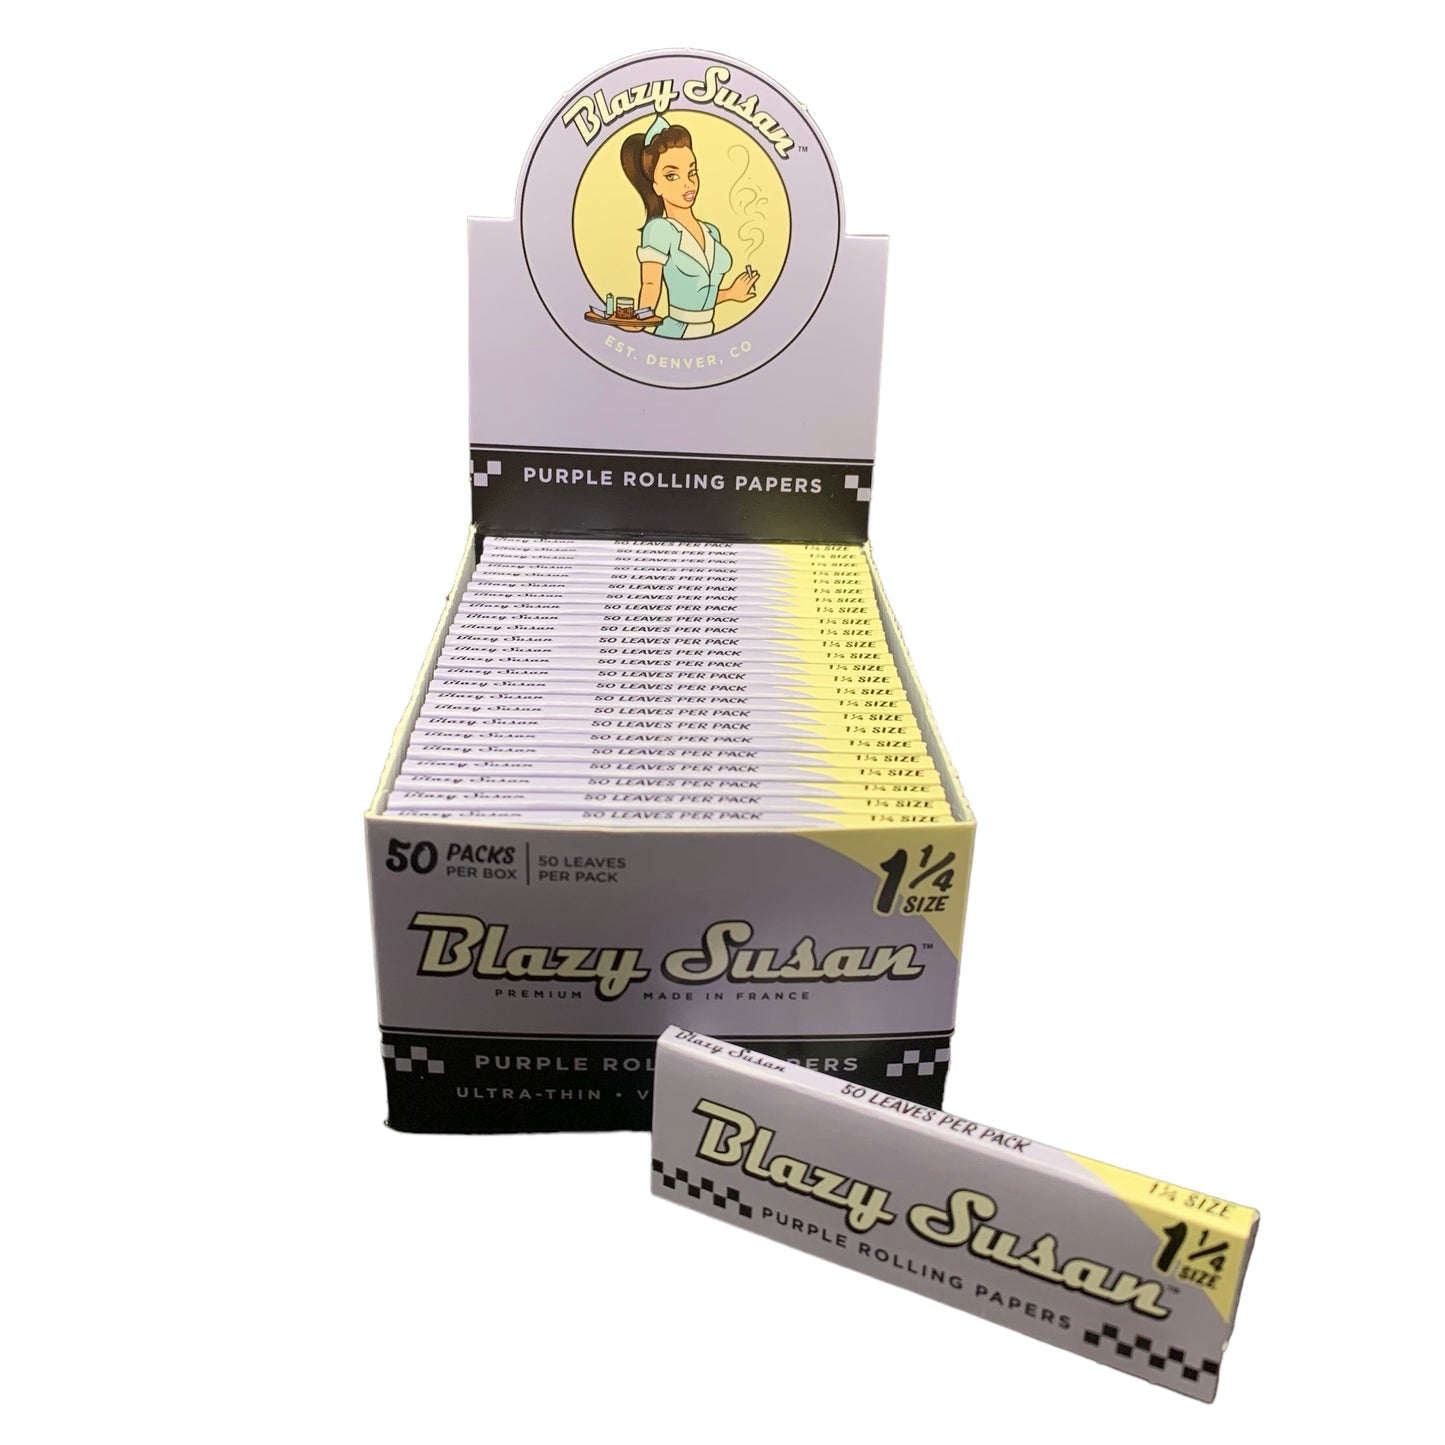 Blazy Susan Rolling Papers - Size 1 1/4, 50 Leaves Per Booklet, 50 Booklets Per Box (Color Options Available) (B2B)